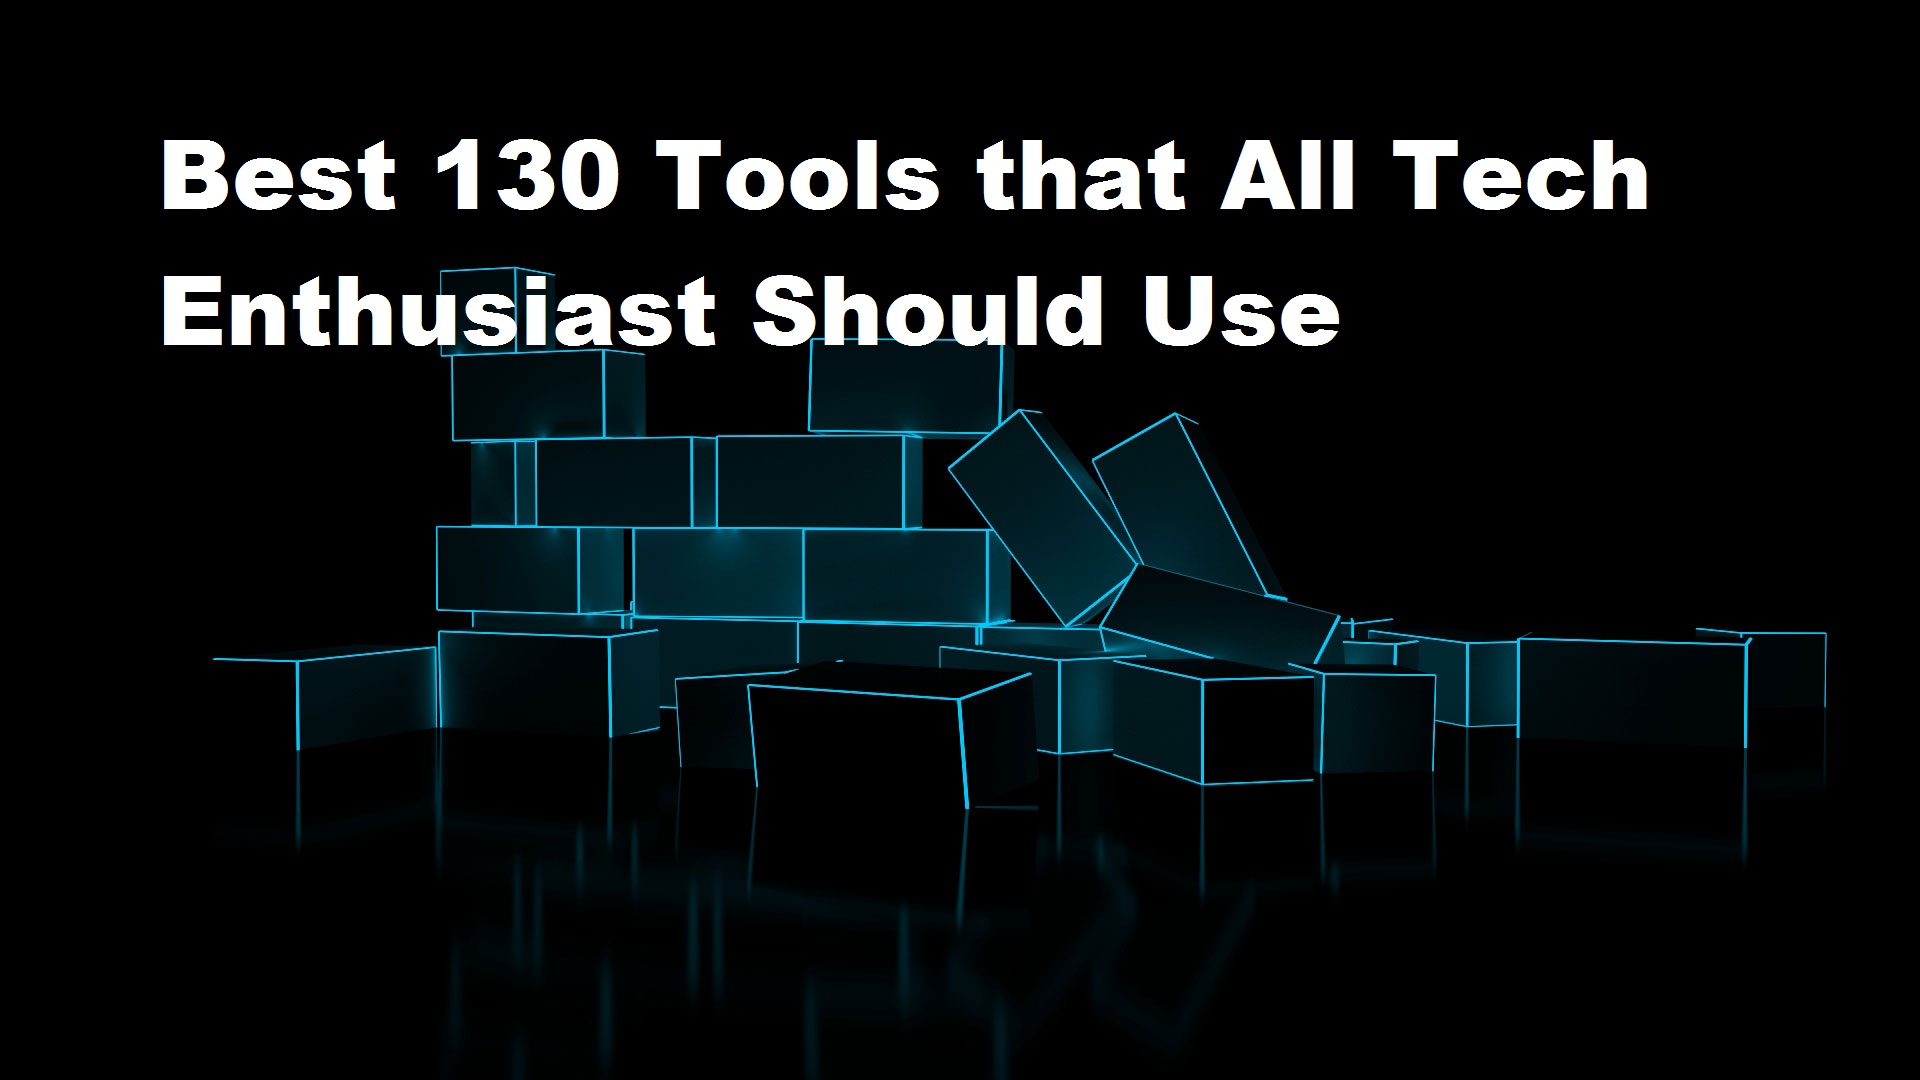 Best 130 Tools that All Tech Enthusiast Should Use